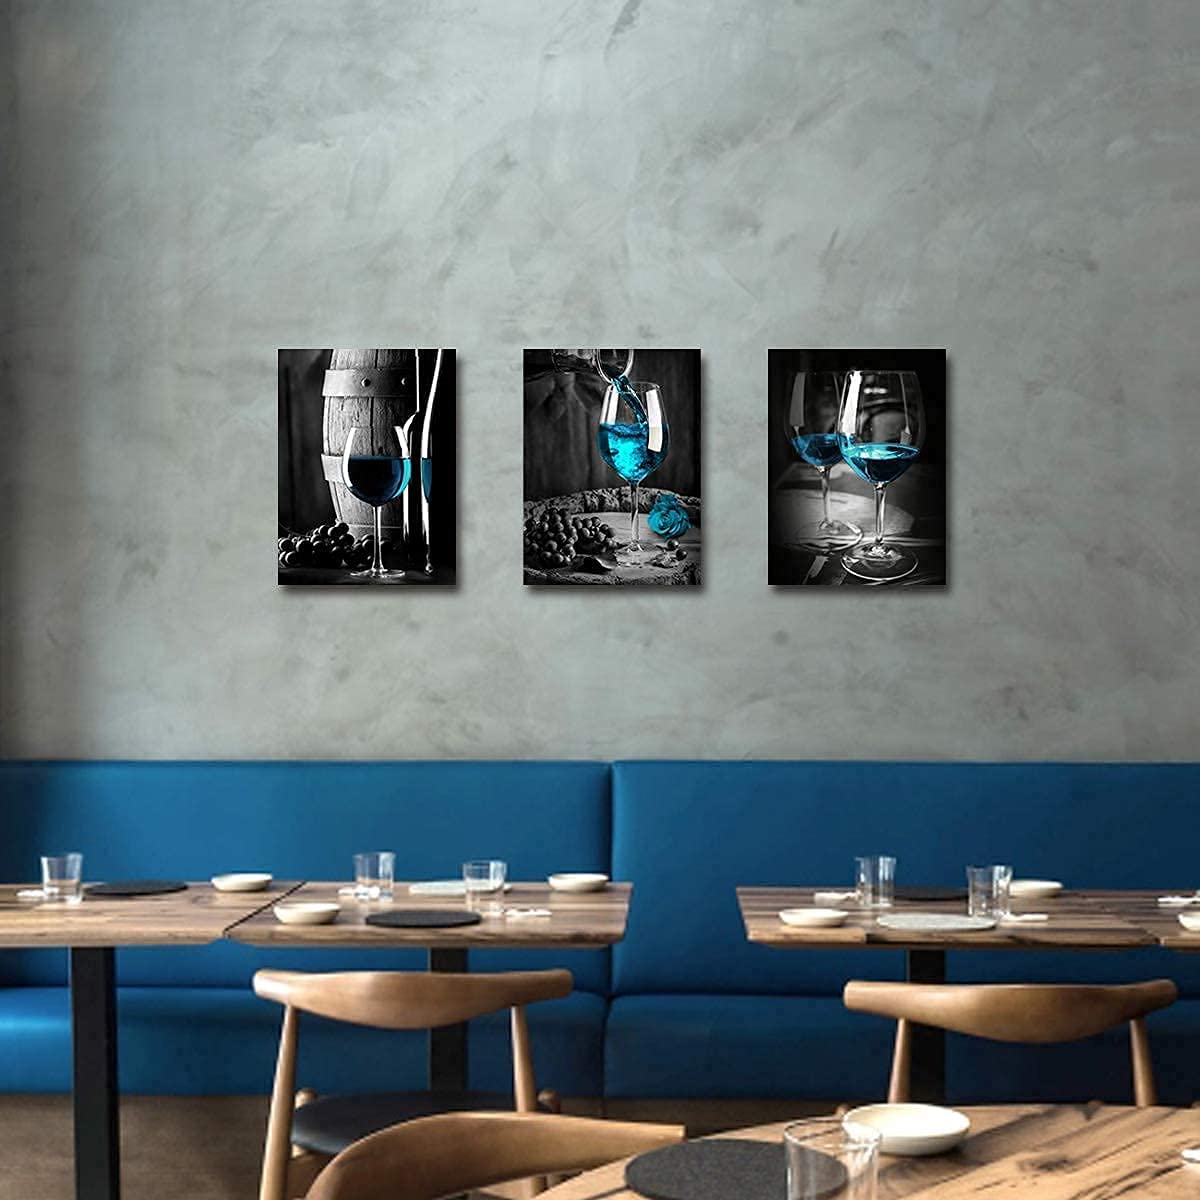 Teal Wine Glass Wall Art for Kitchen Dining Room Turquoise Wine Wall Decor Vintage Wine Pictures Canvas Prints Blue Gray Wine Paintings Cask Barrel Posters Contemporary Home Decorations 20x28” 3 Pcs